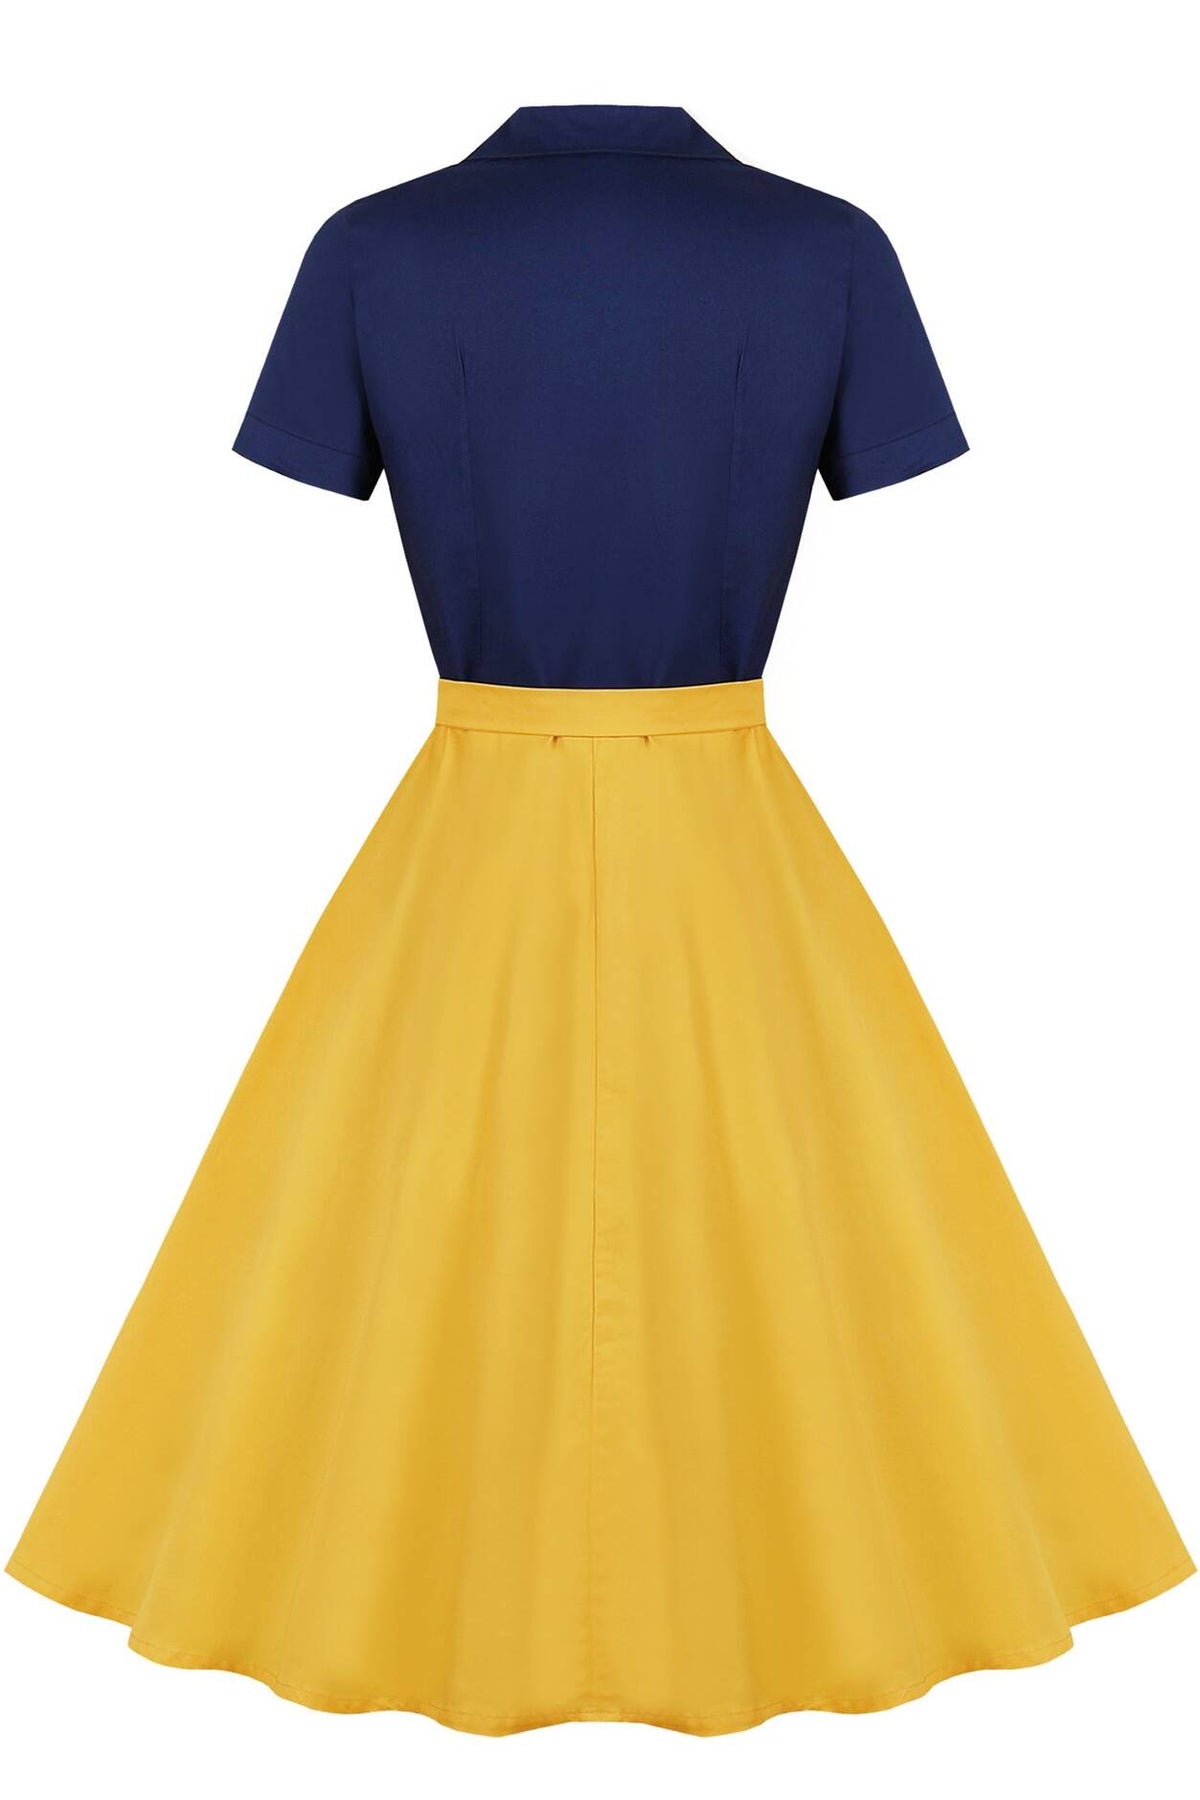 Snow White Style Navy and White 1950s Dress